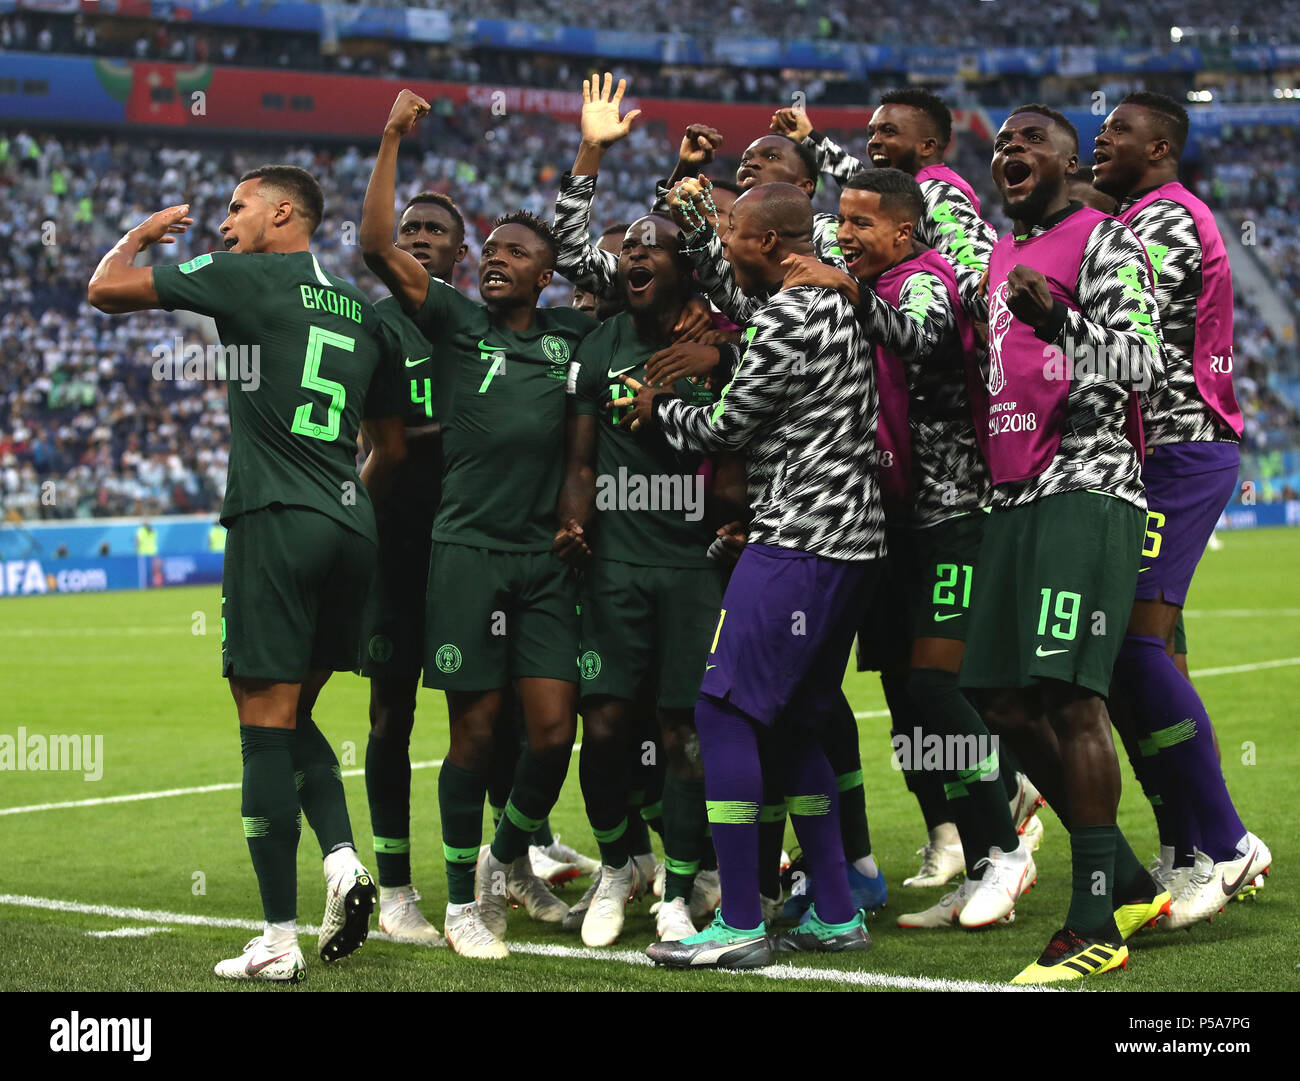 Saint Petersburg, Russia. 26th June, 2018. Victor Moses (4th L) of Nigeria celebrates scoring with teammates during the 2018 FIFA World Cup Group D match between Nigeria and Argentina in Saint Petersburg, Russia, June 26, 2018. Argentina won 2-1 and advanced to the round of 16. Credit: Wu Zhuang/Xinhua/Alamy Live News Stock Photo